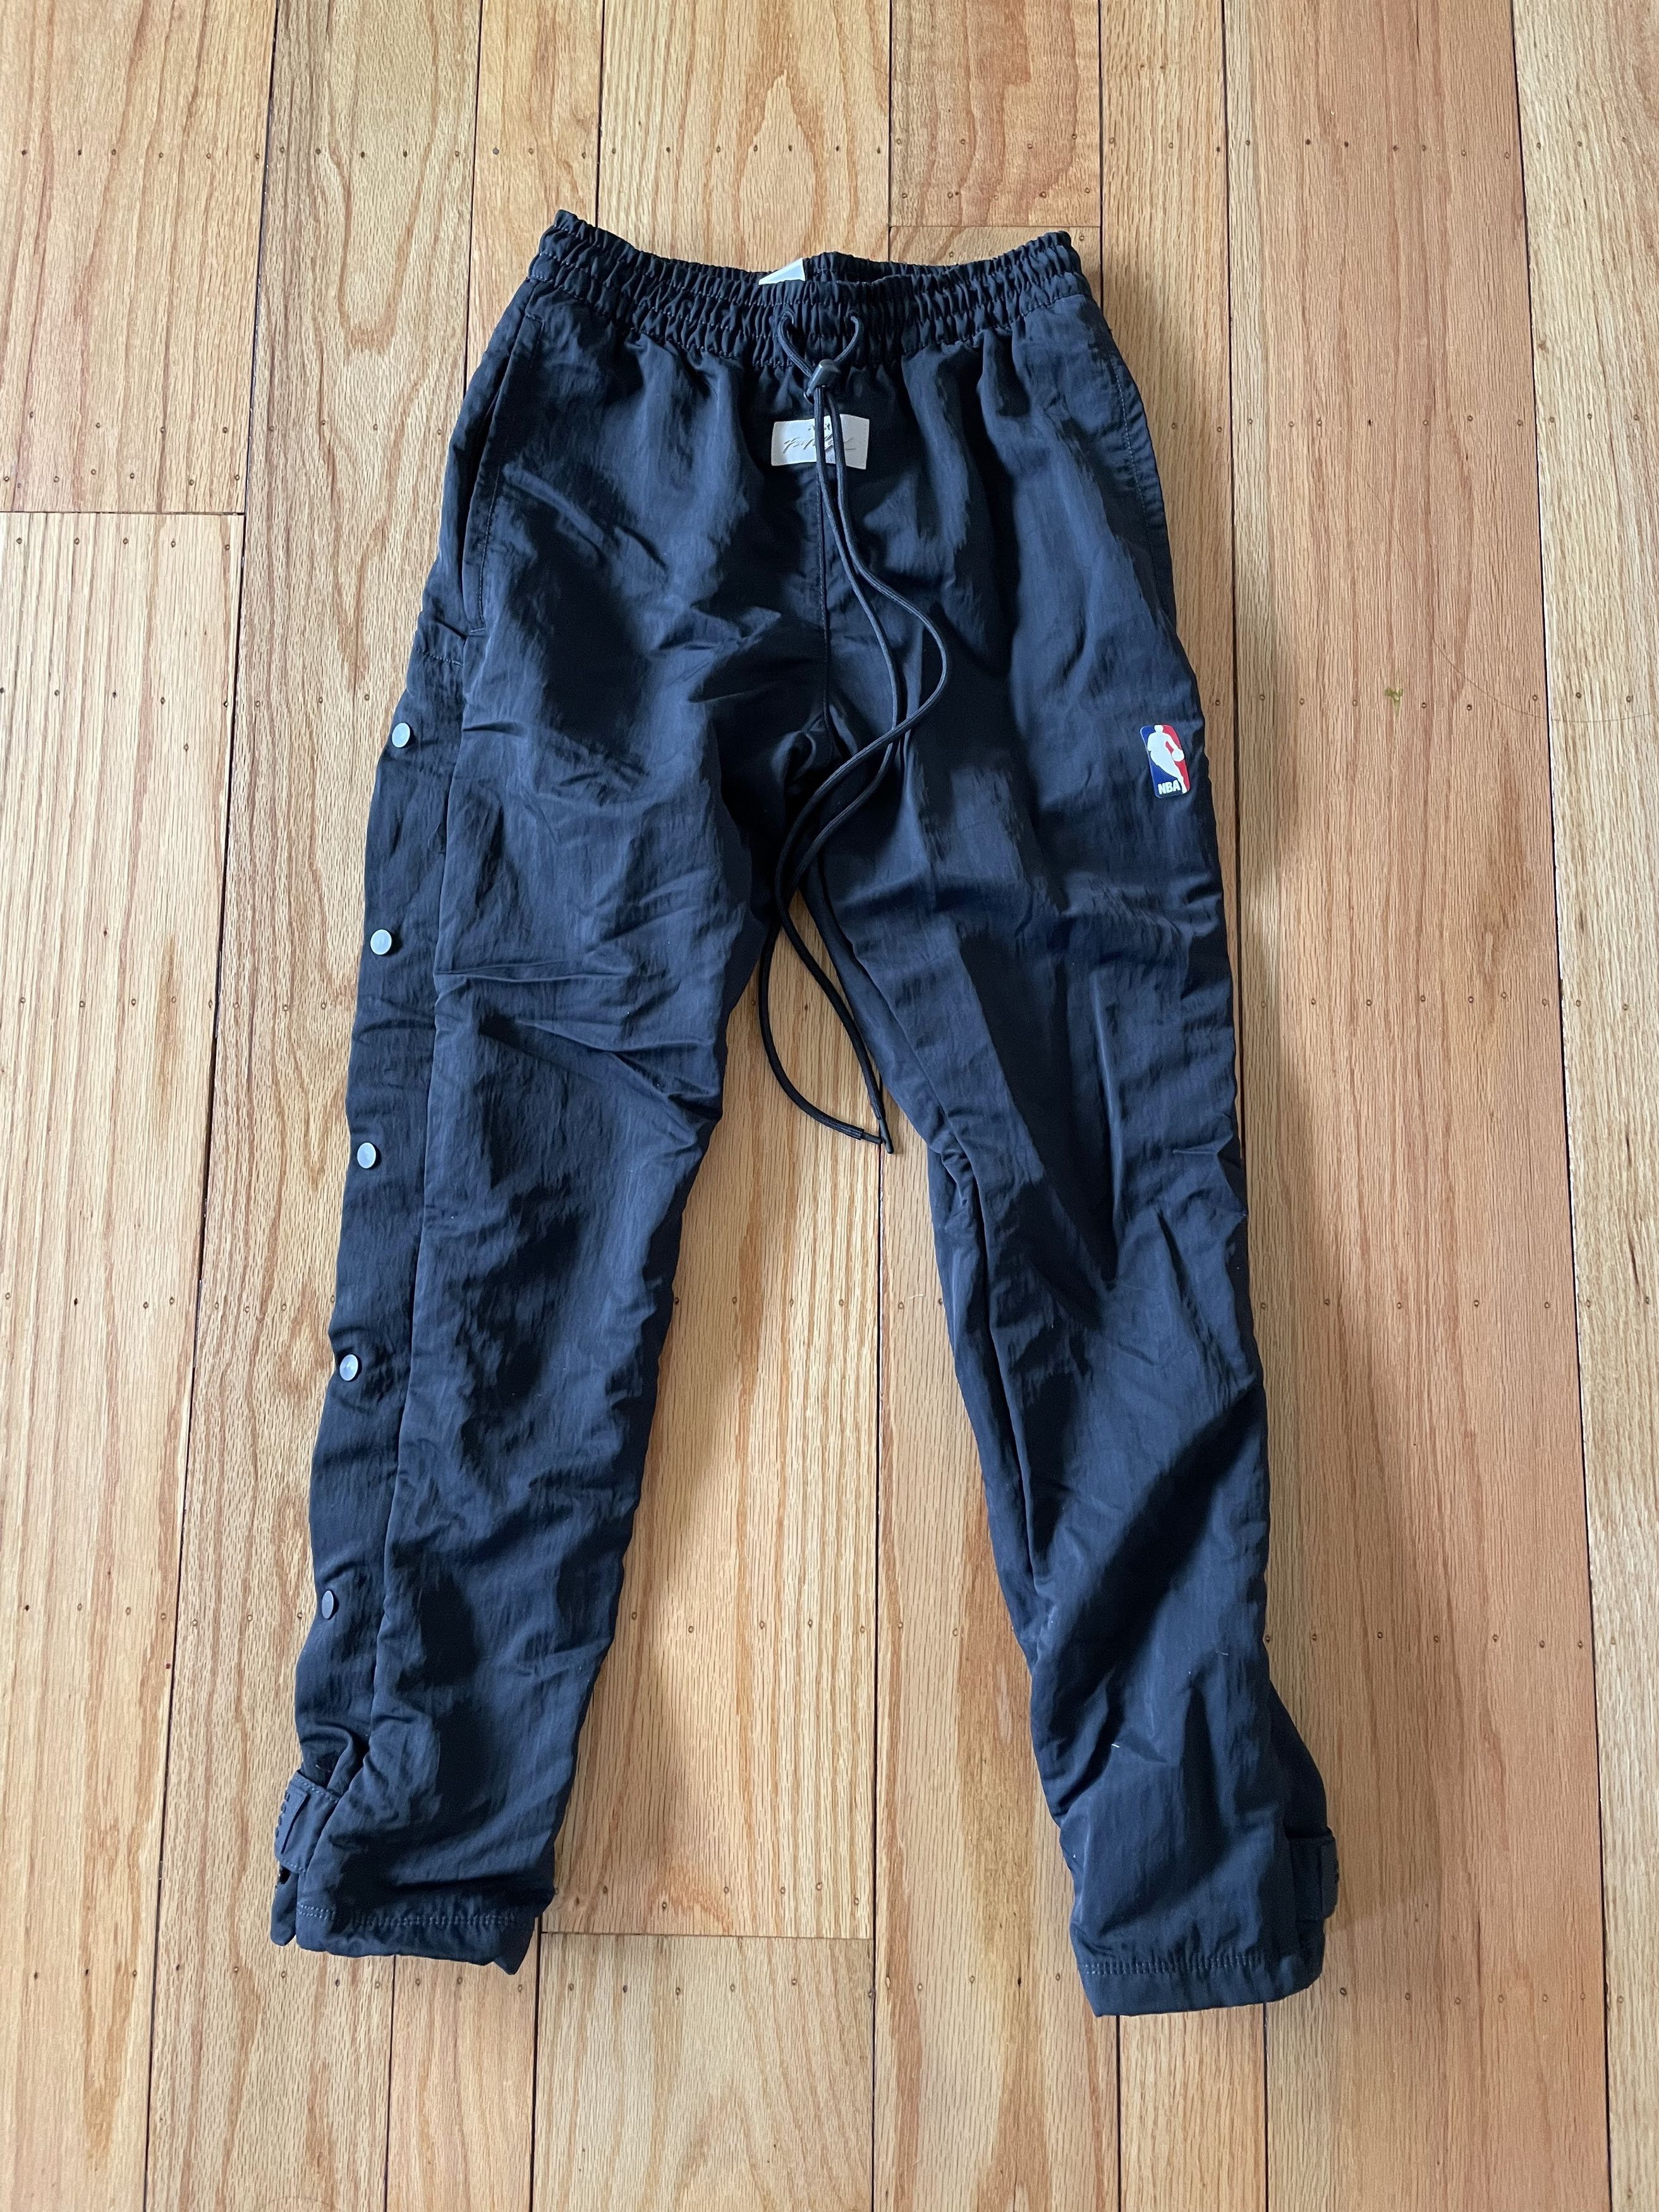 Nike Warm Up Pants in Size XS Size US 28 / EU 44 - 2 Preview